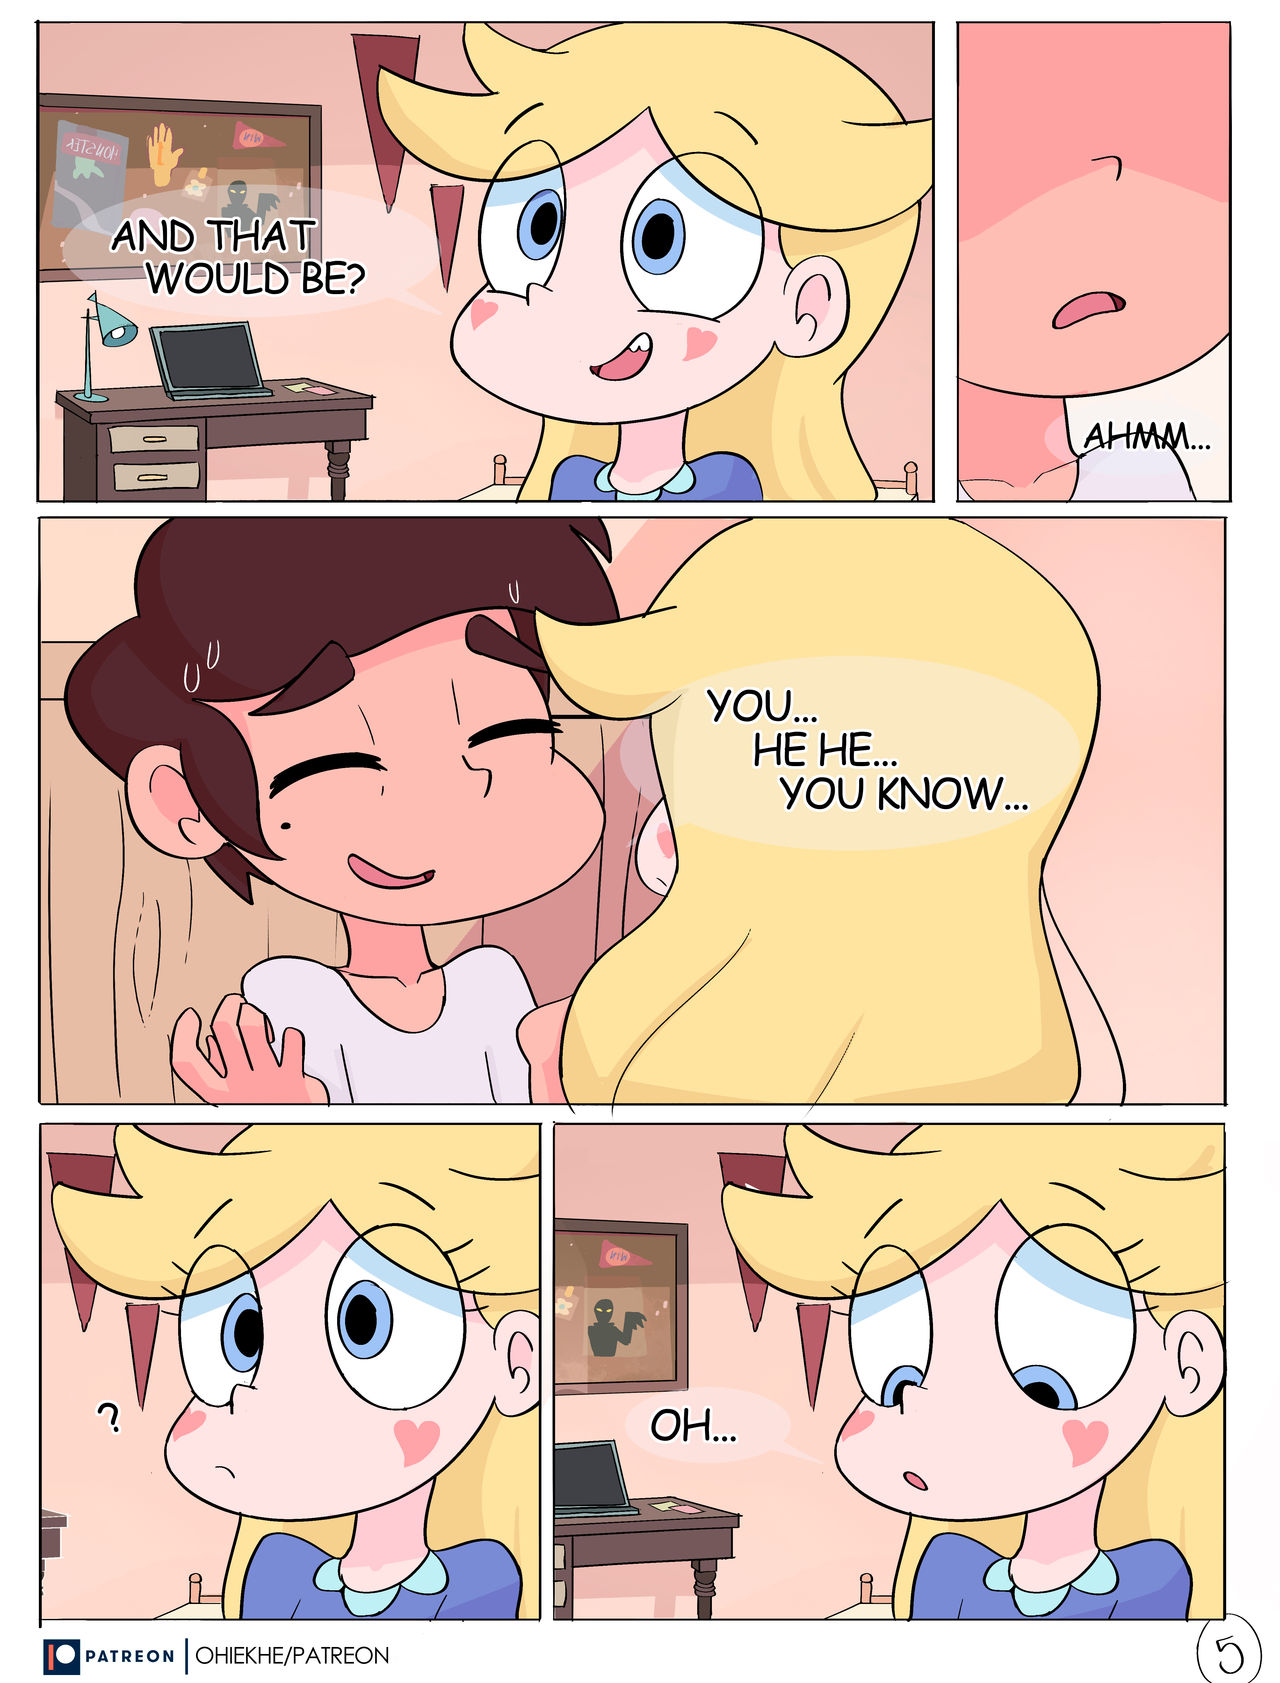 Princess Star Butterfly Porn - Ohiekhe] Time Alone - Star vs the Forces of Evil â€¢ Free Porn Comics